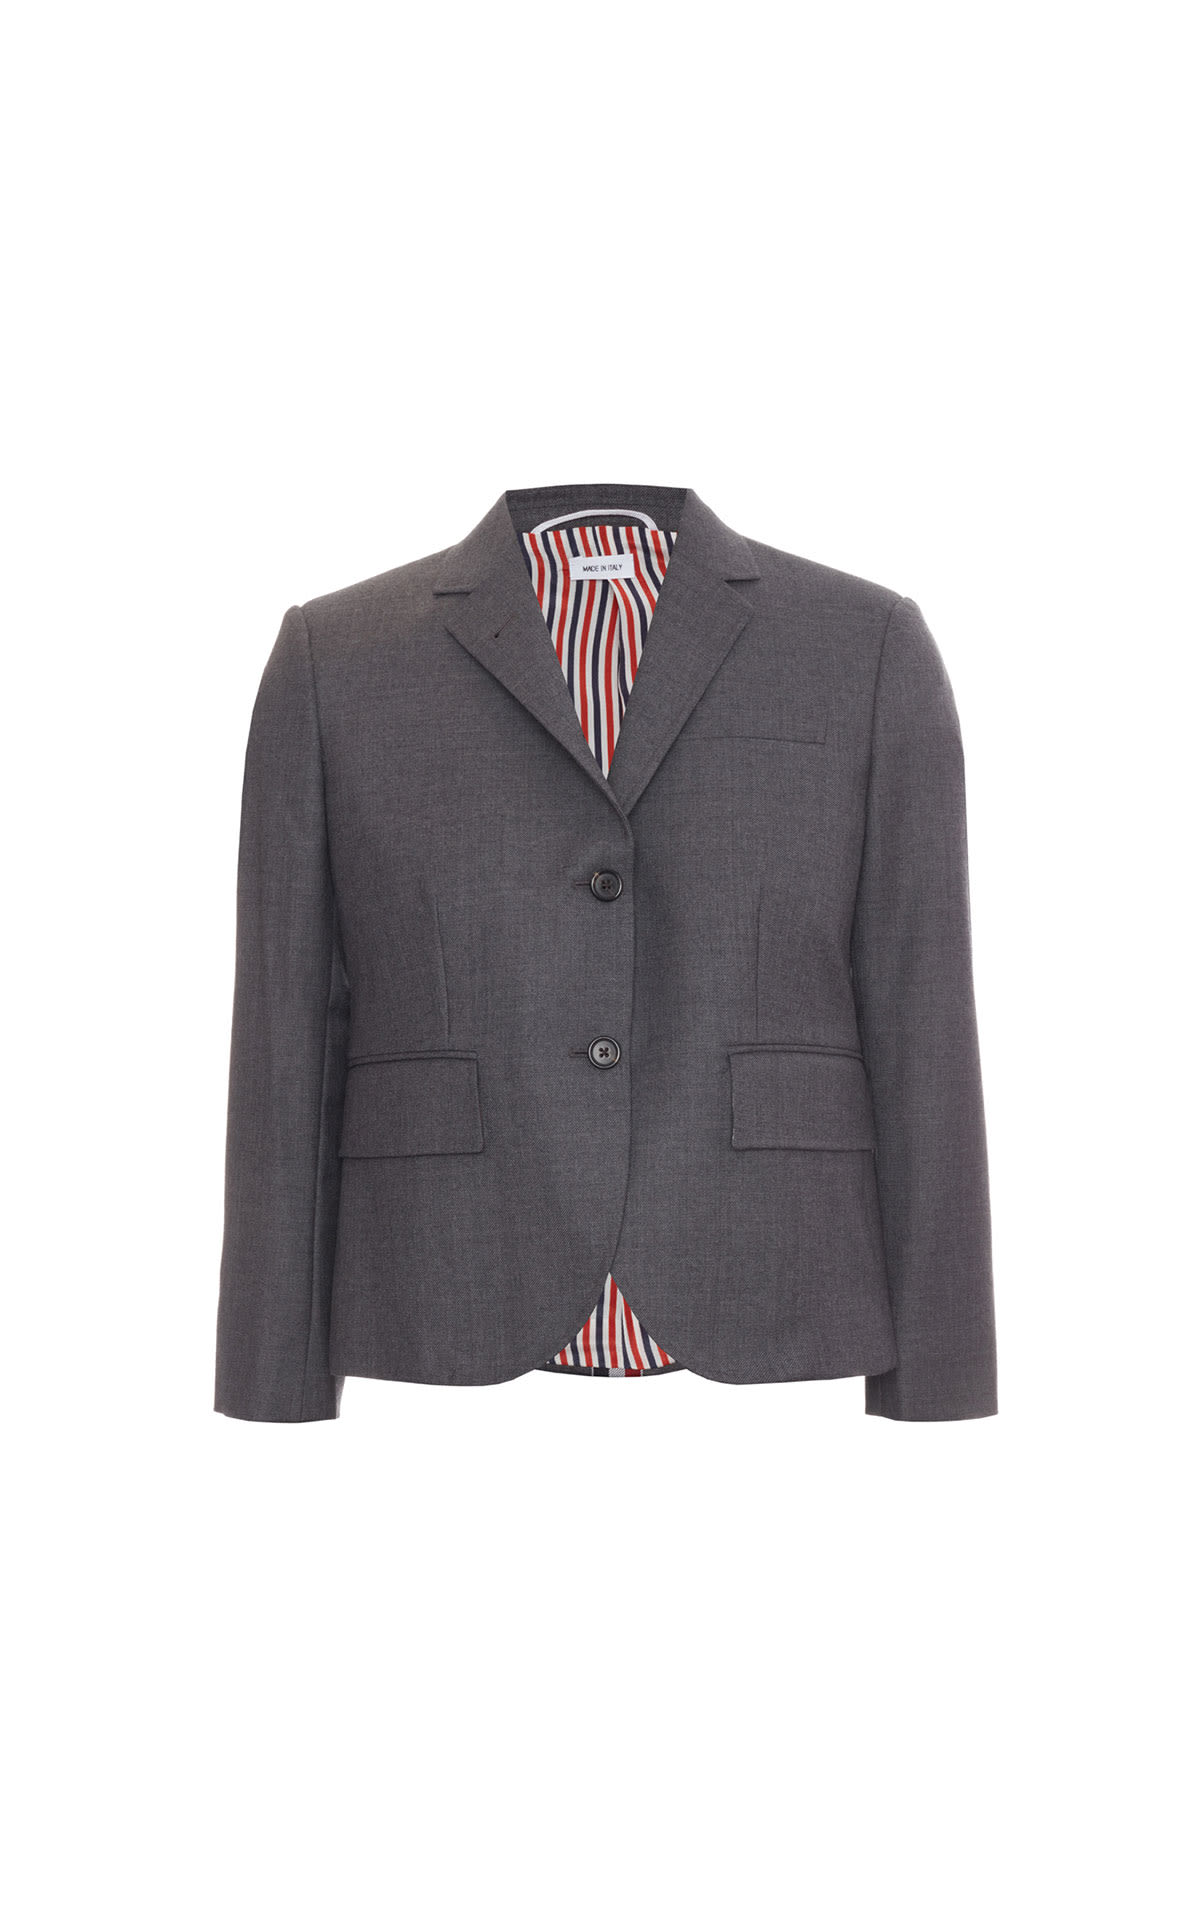 Thom Browne Classic wool twill jacket  from Bicester Village